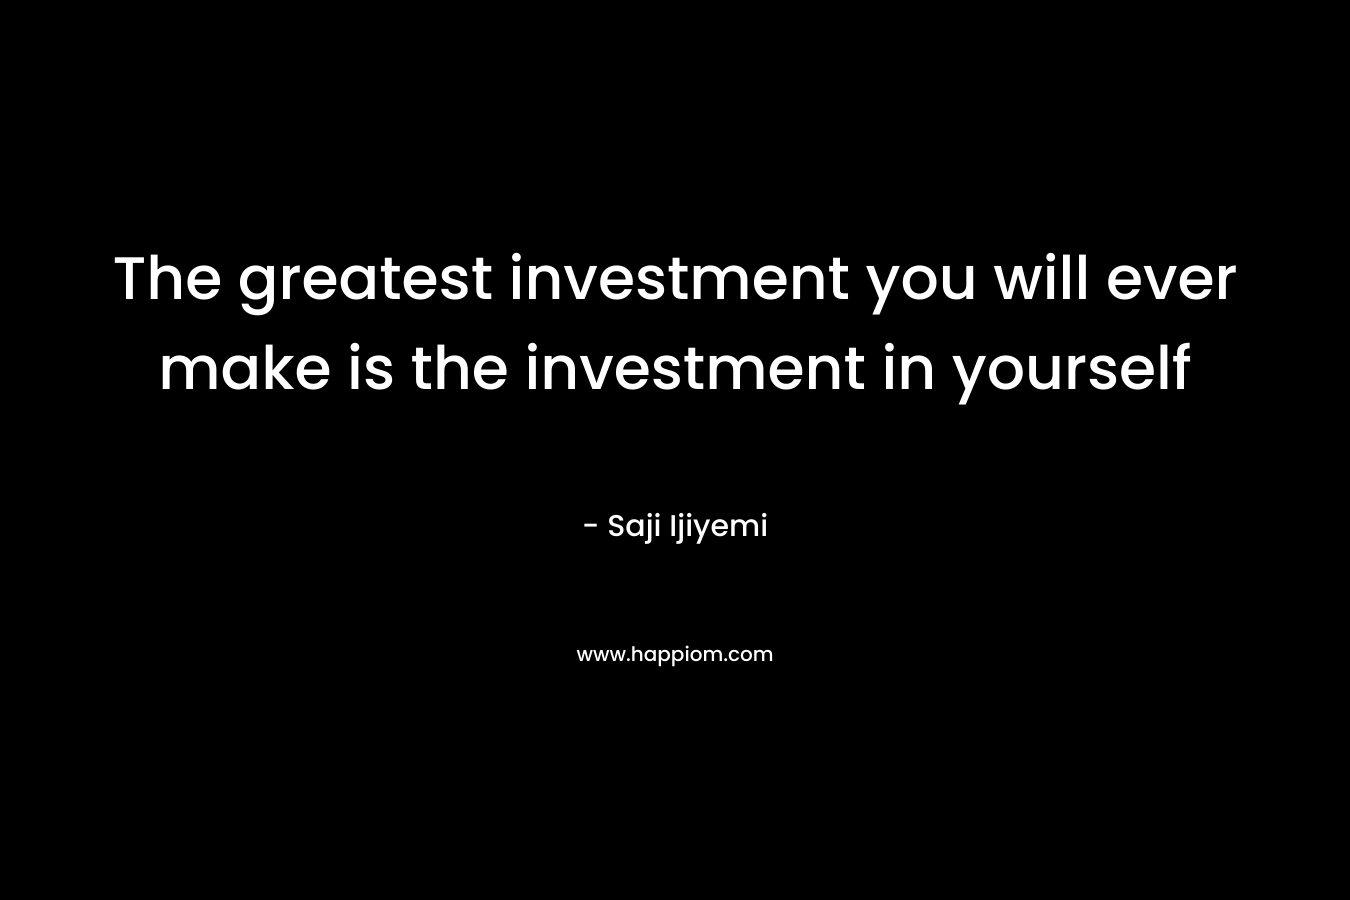 The greatest investment you will ever make is the investment in yourself – Saji Ijiyemi